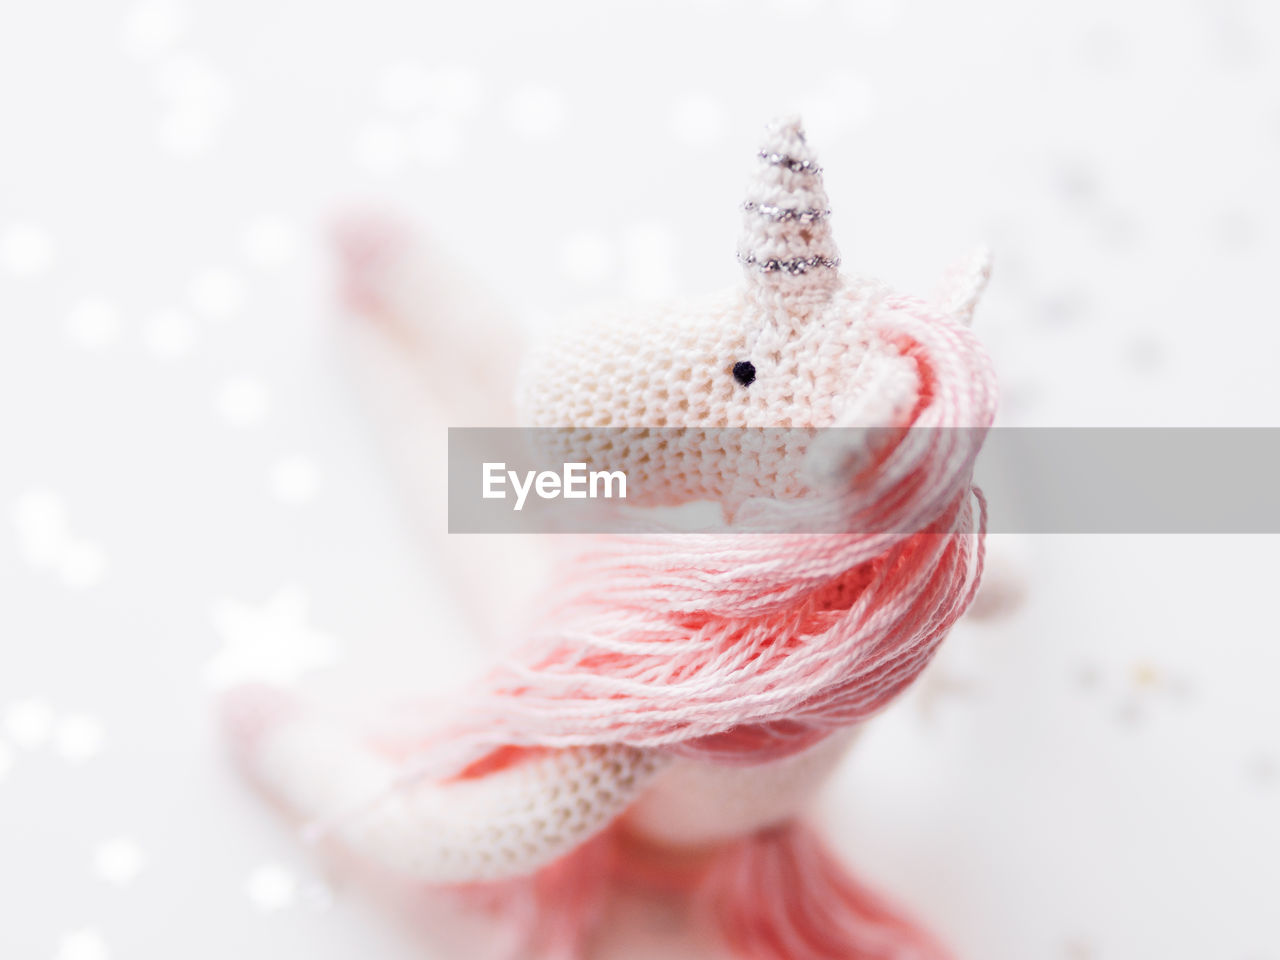 Cute fairy unicorn with pink mane. crocheted hand made toy on white background with silver stars.